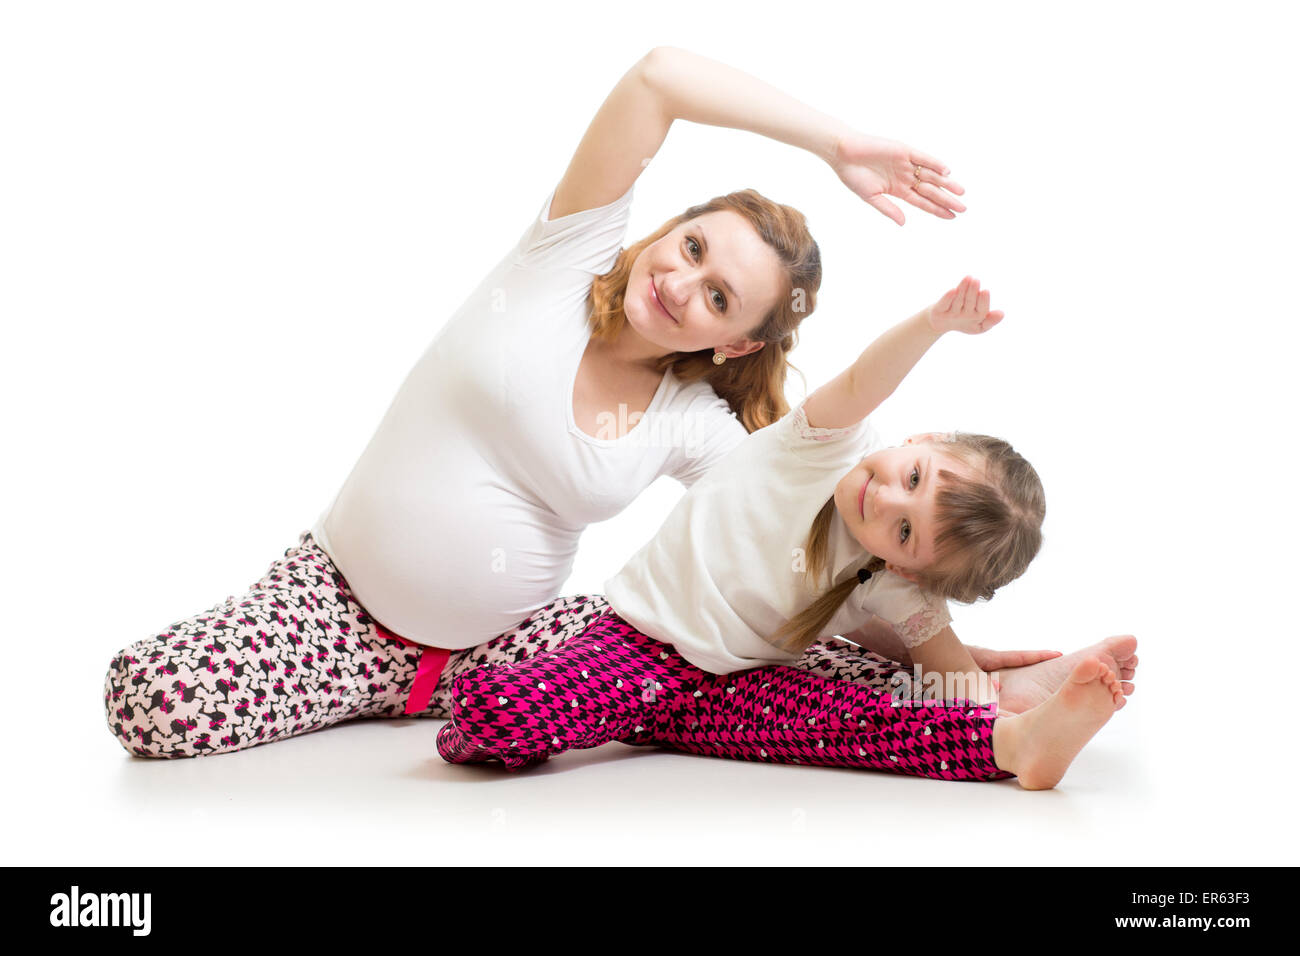 Family doing gymnastics. Pregnant woman with child daughter exercising stretching on floor Stock Photo